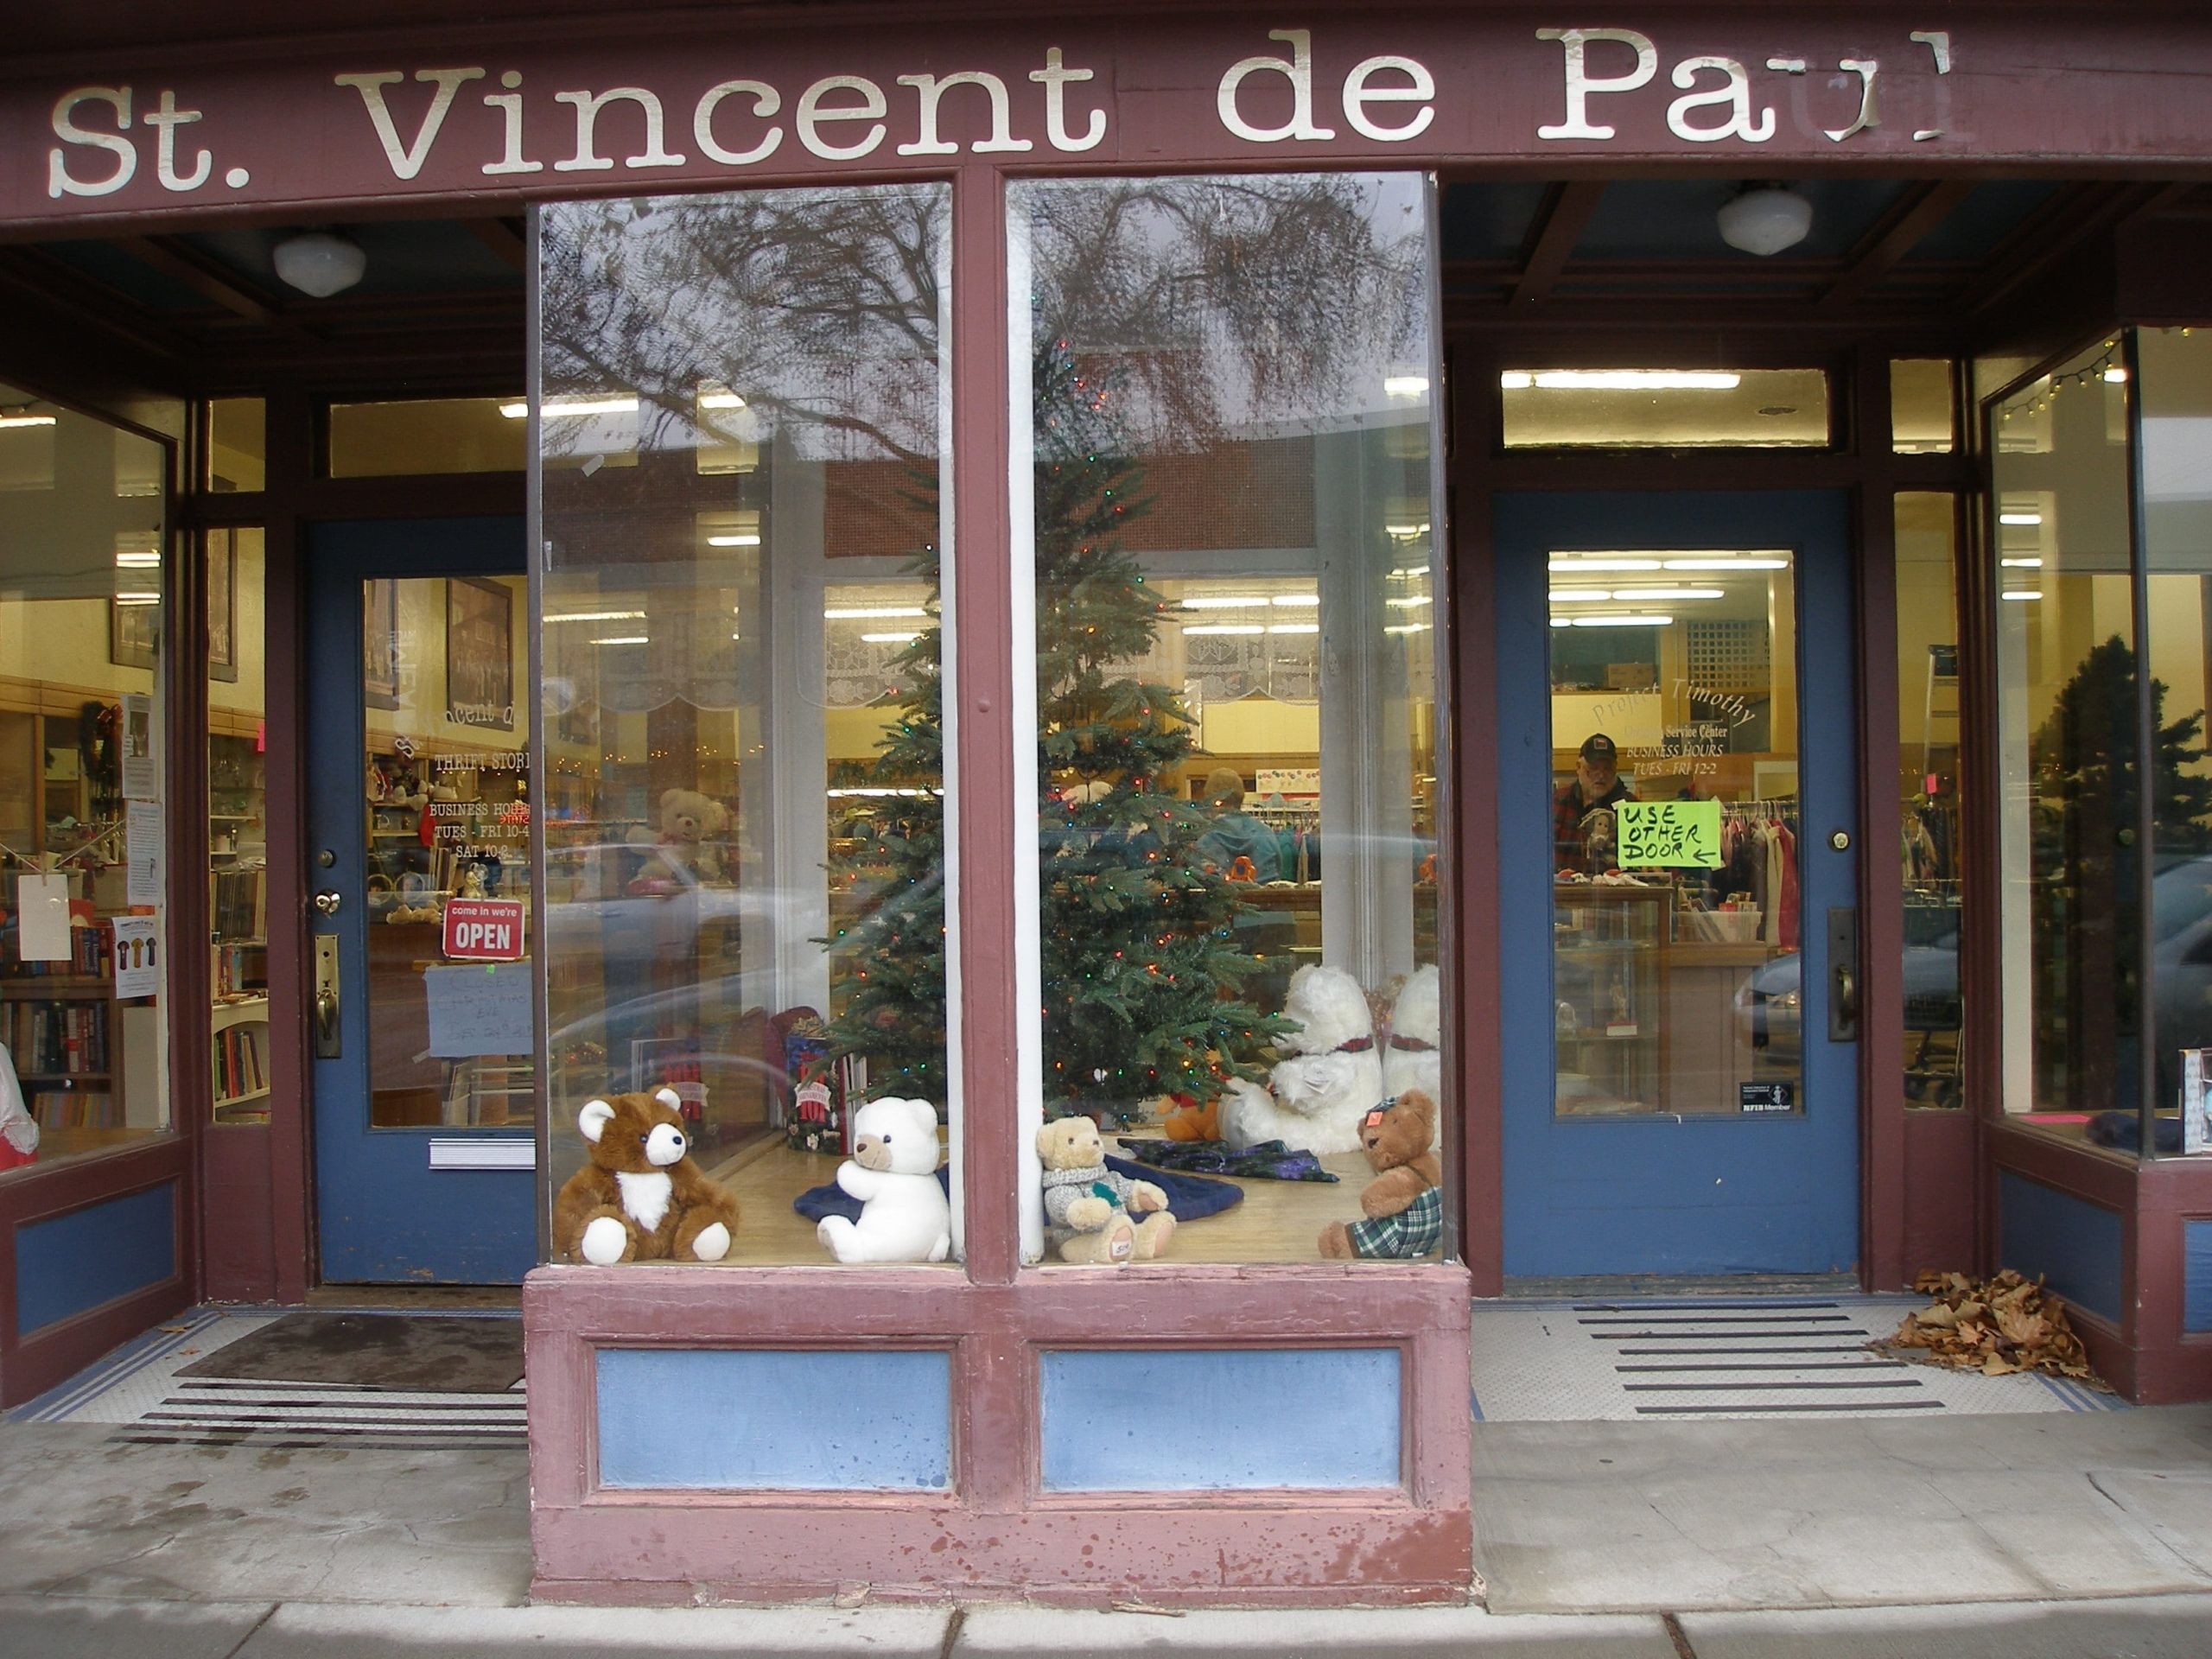 Project Timothy is located within the St Vincent de Paul building in Dayton, WA